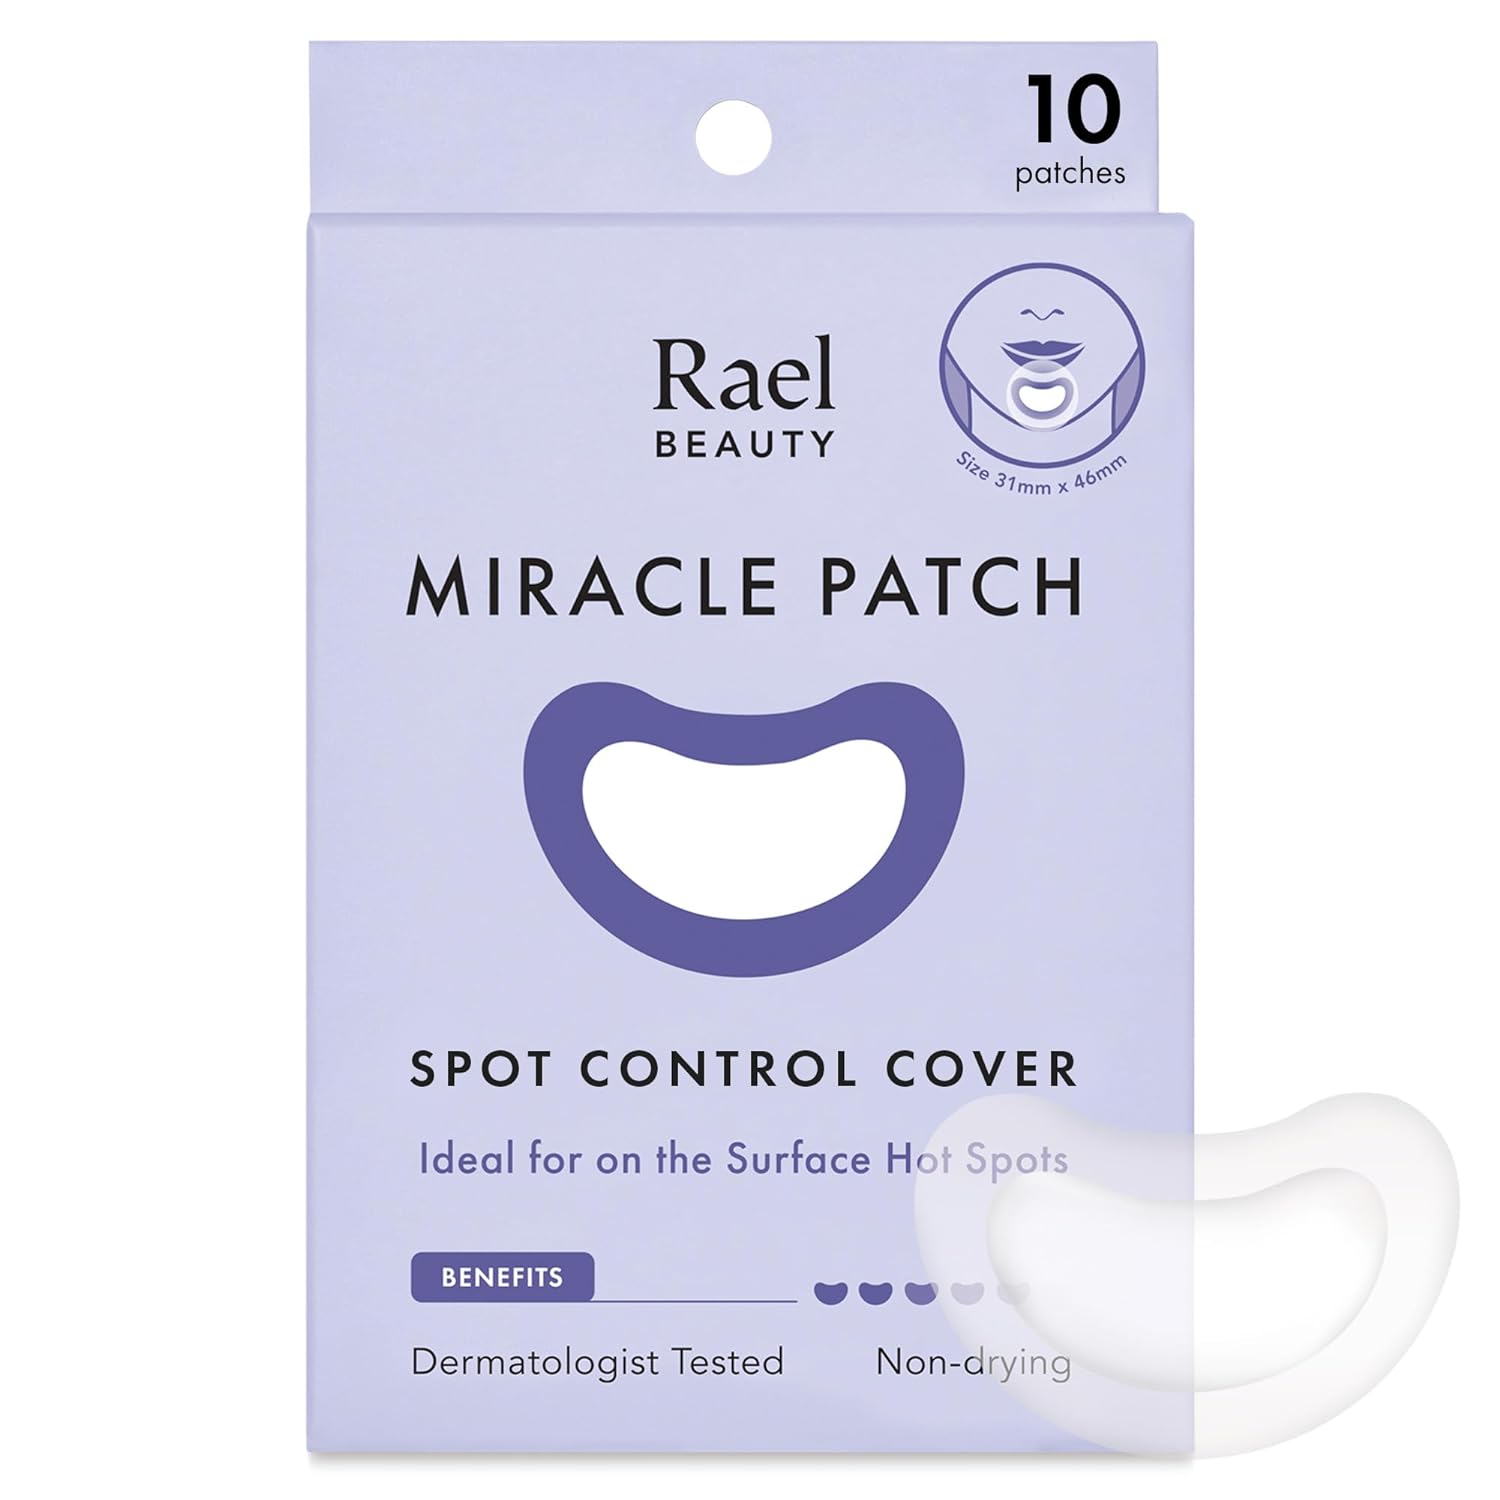 Rael Pimple Patches, Miracle Patches Large Spot Control Cover - Hydrocolloid Acne Patches for Face, Strip for Breakouts, Zit, Blemish Spot, Facial Stickers, All Skin Types, Vegan (10 Count)